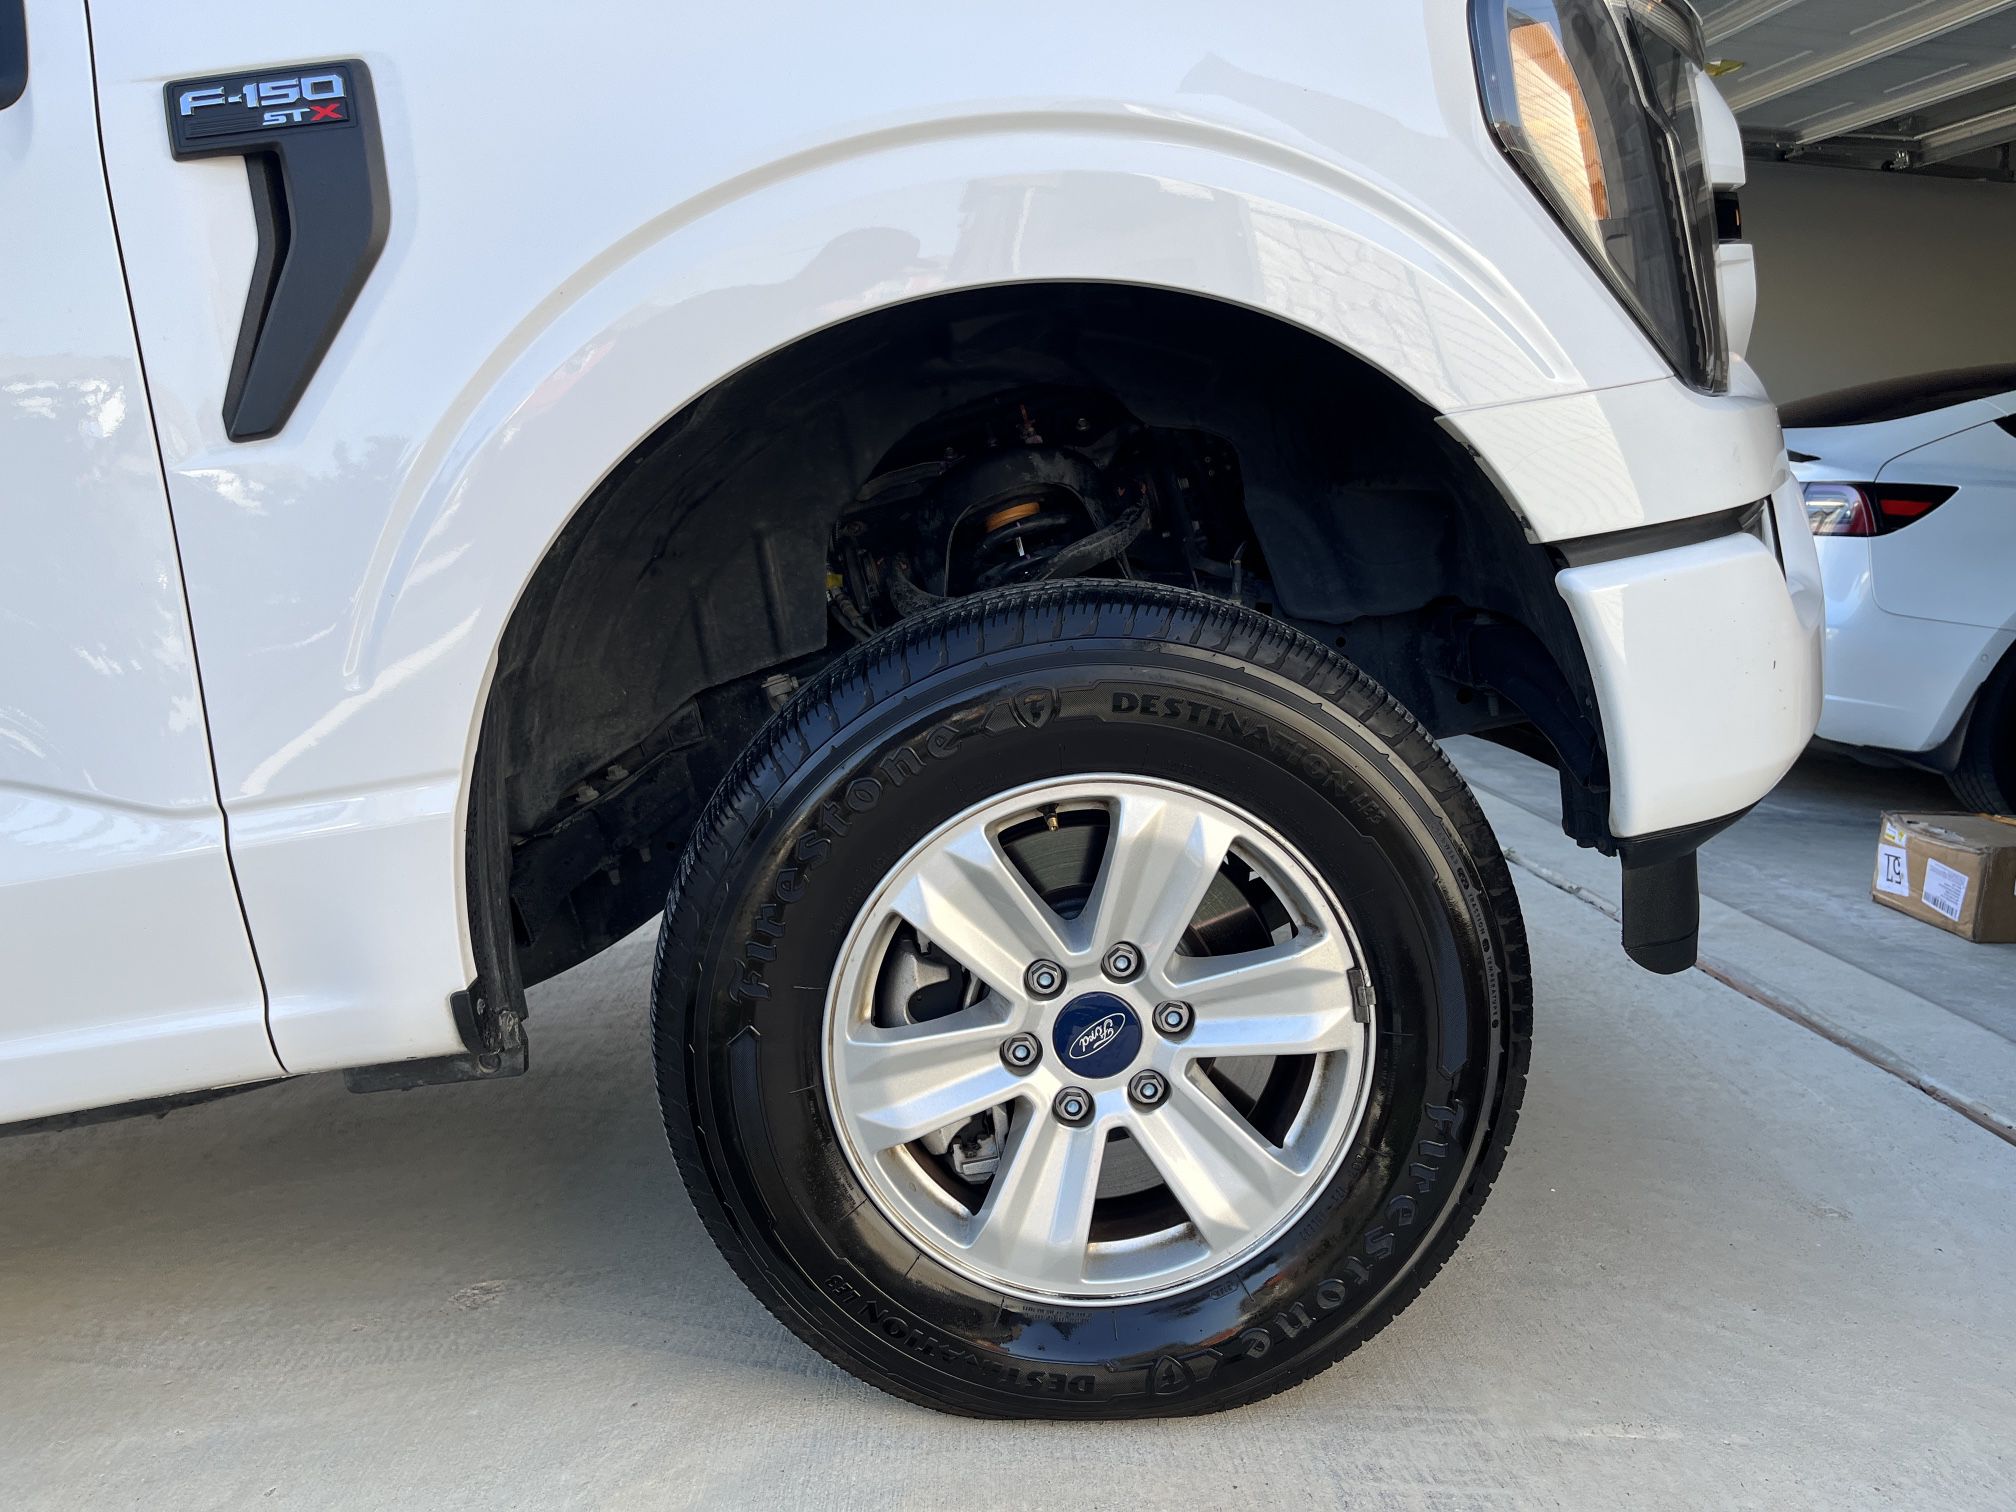 Stock Ford F150 Wheels (rims + Tires)